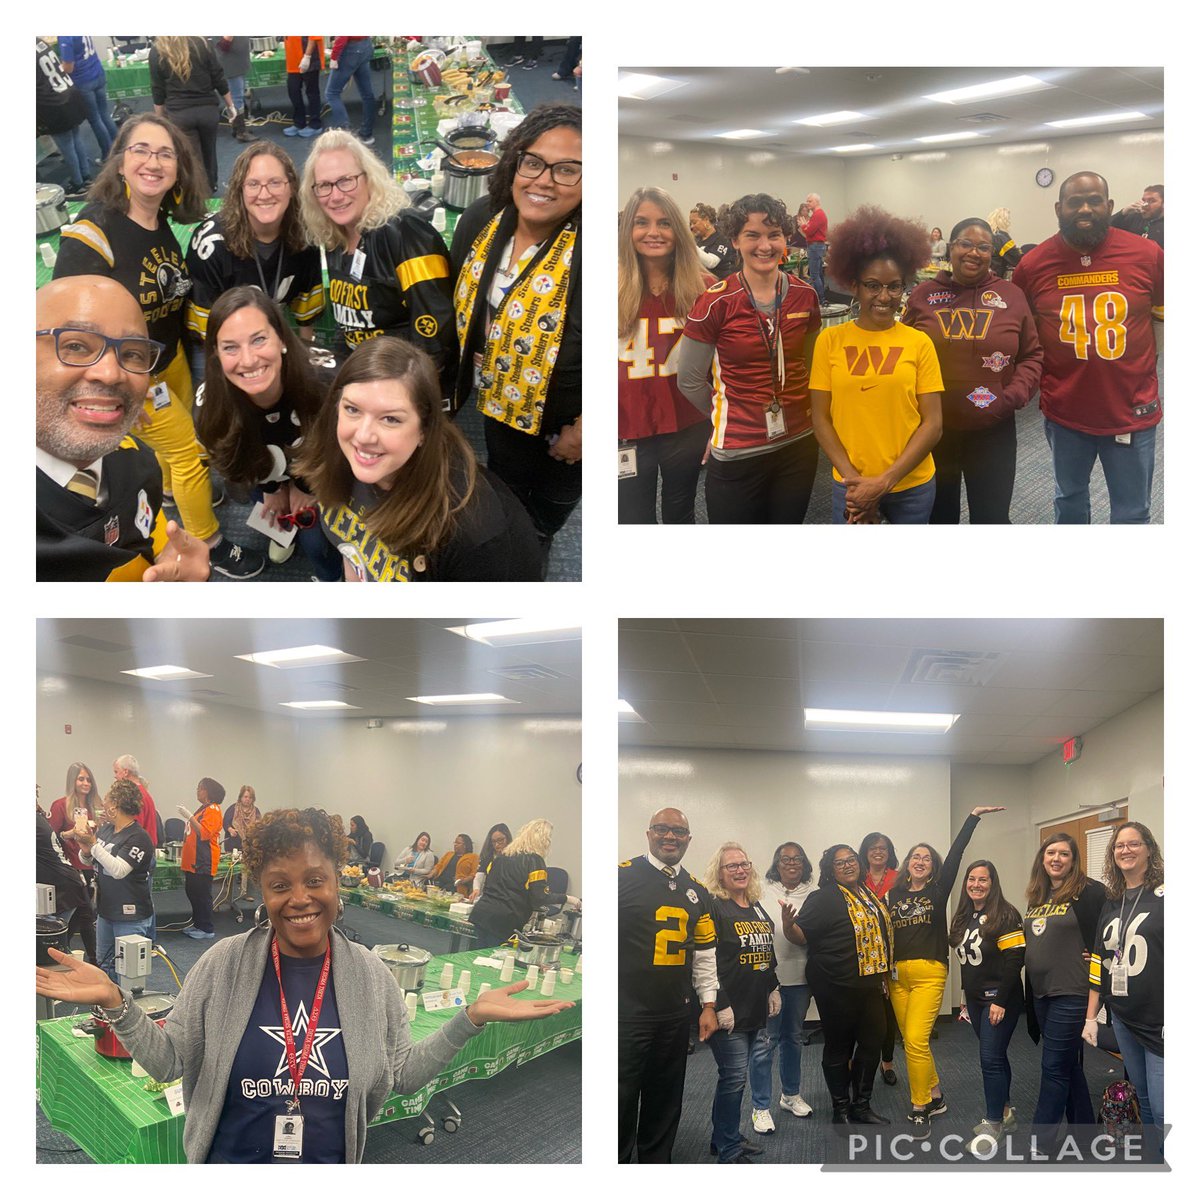 Kicking off our 'Souper Bowl' team building lunch in style @nnschools Department of Teaching and Learning! 🏈🍲 Proud of our team spirit and unity, dressed in our football jerseys. Getting ready to score big for education! #TeamBuilding #NNDTAL